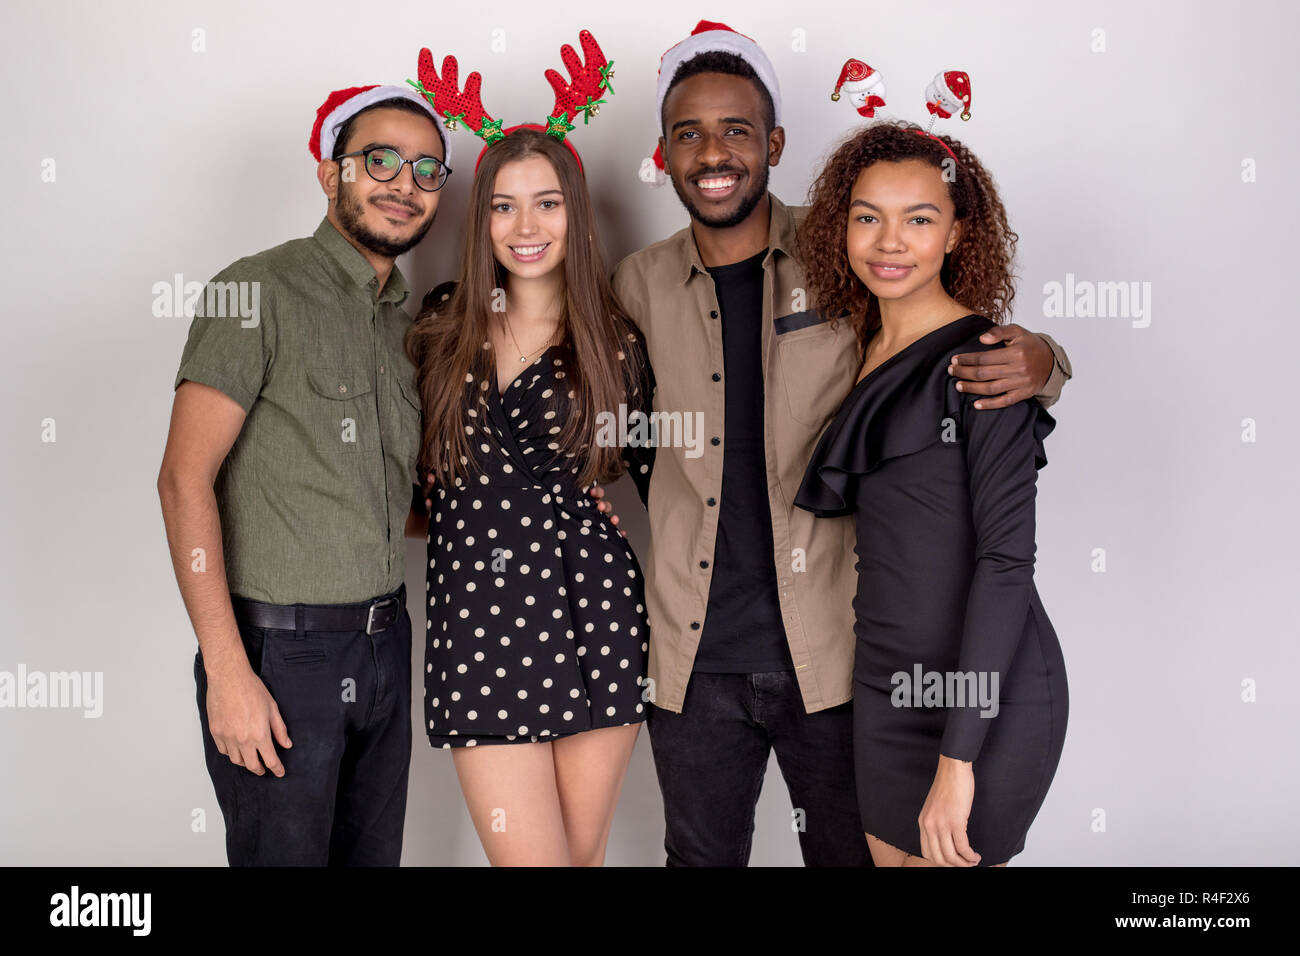 Group of friends in funny Christmas headbands and hats on a white  background Stock Photo - Alamy